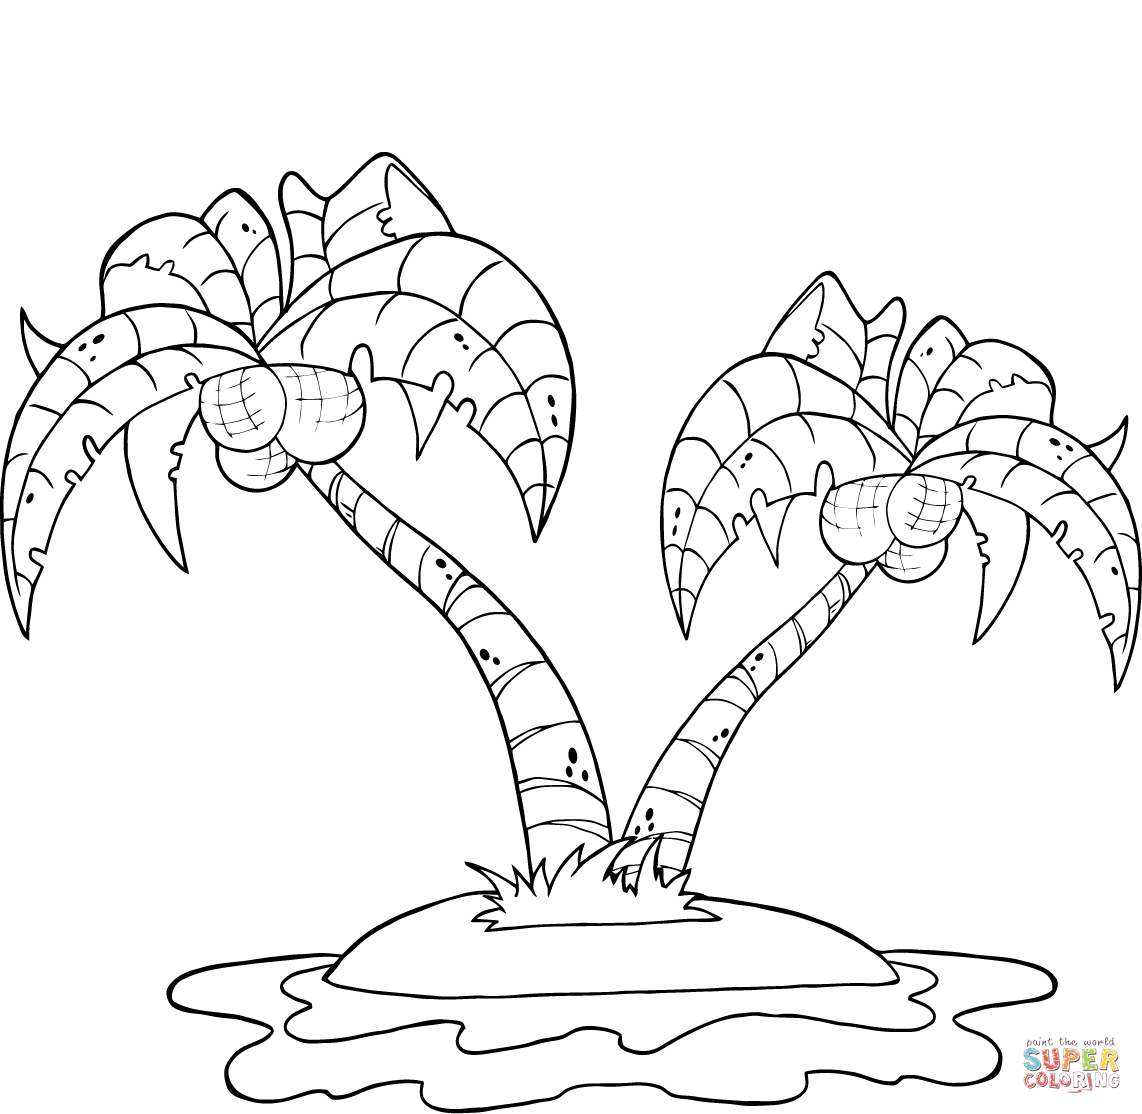 Coconut Palm Trees on Island coloring page | Free Printable